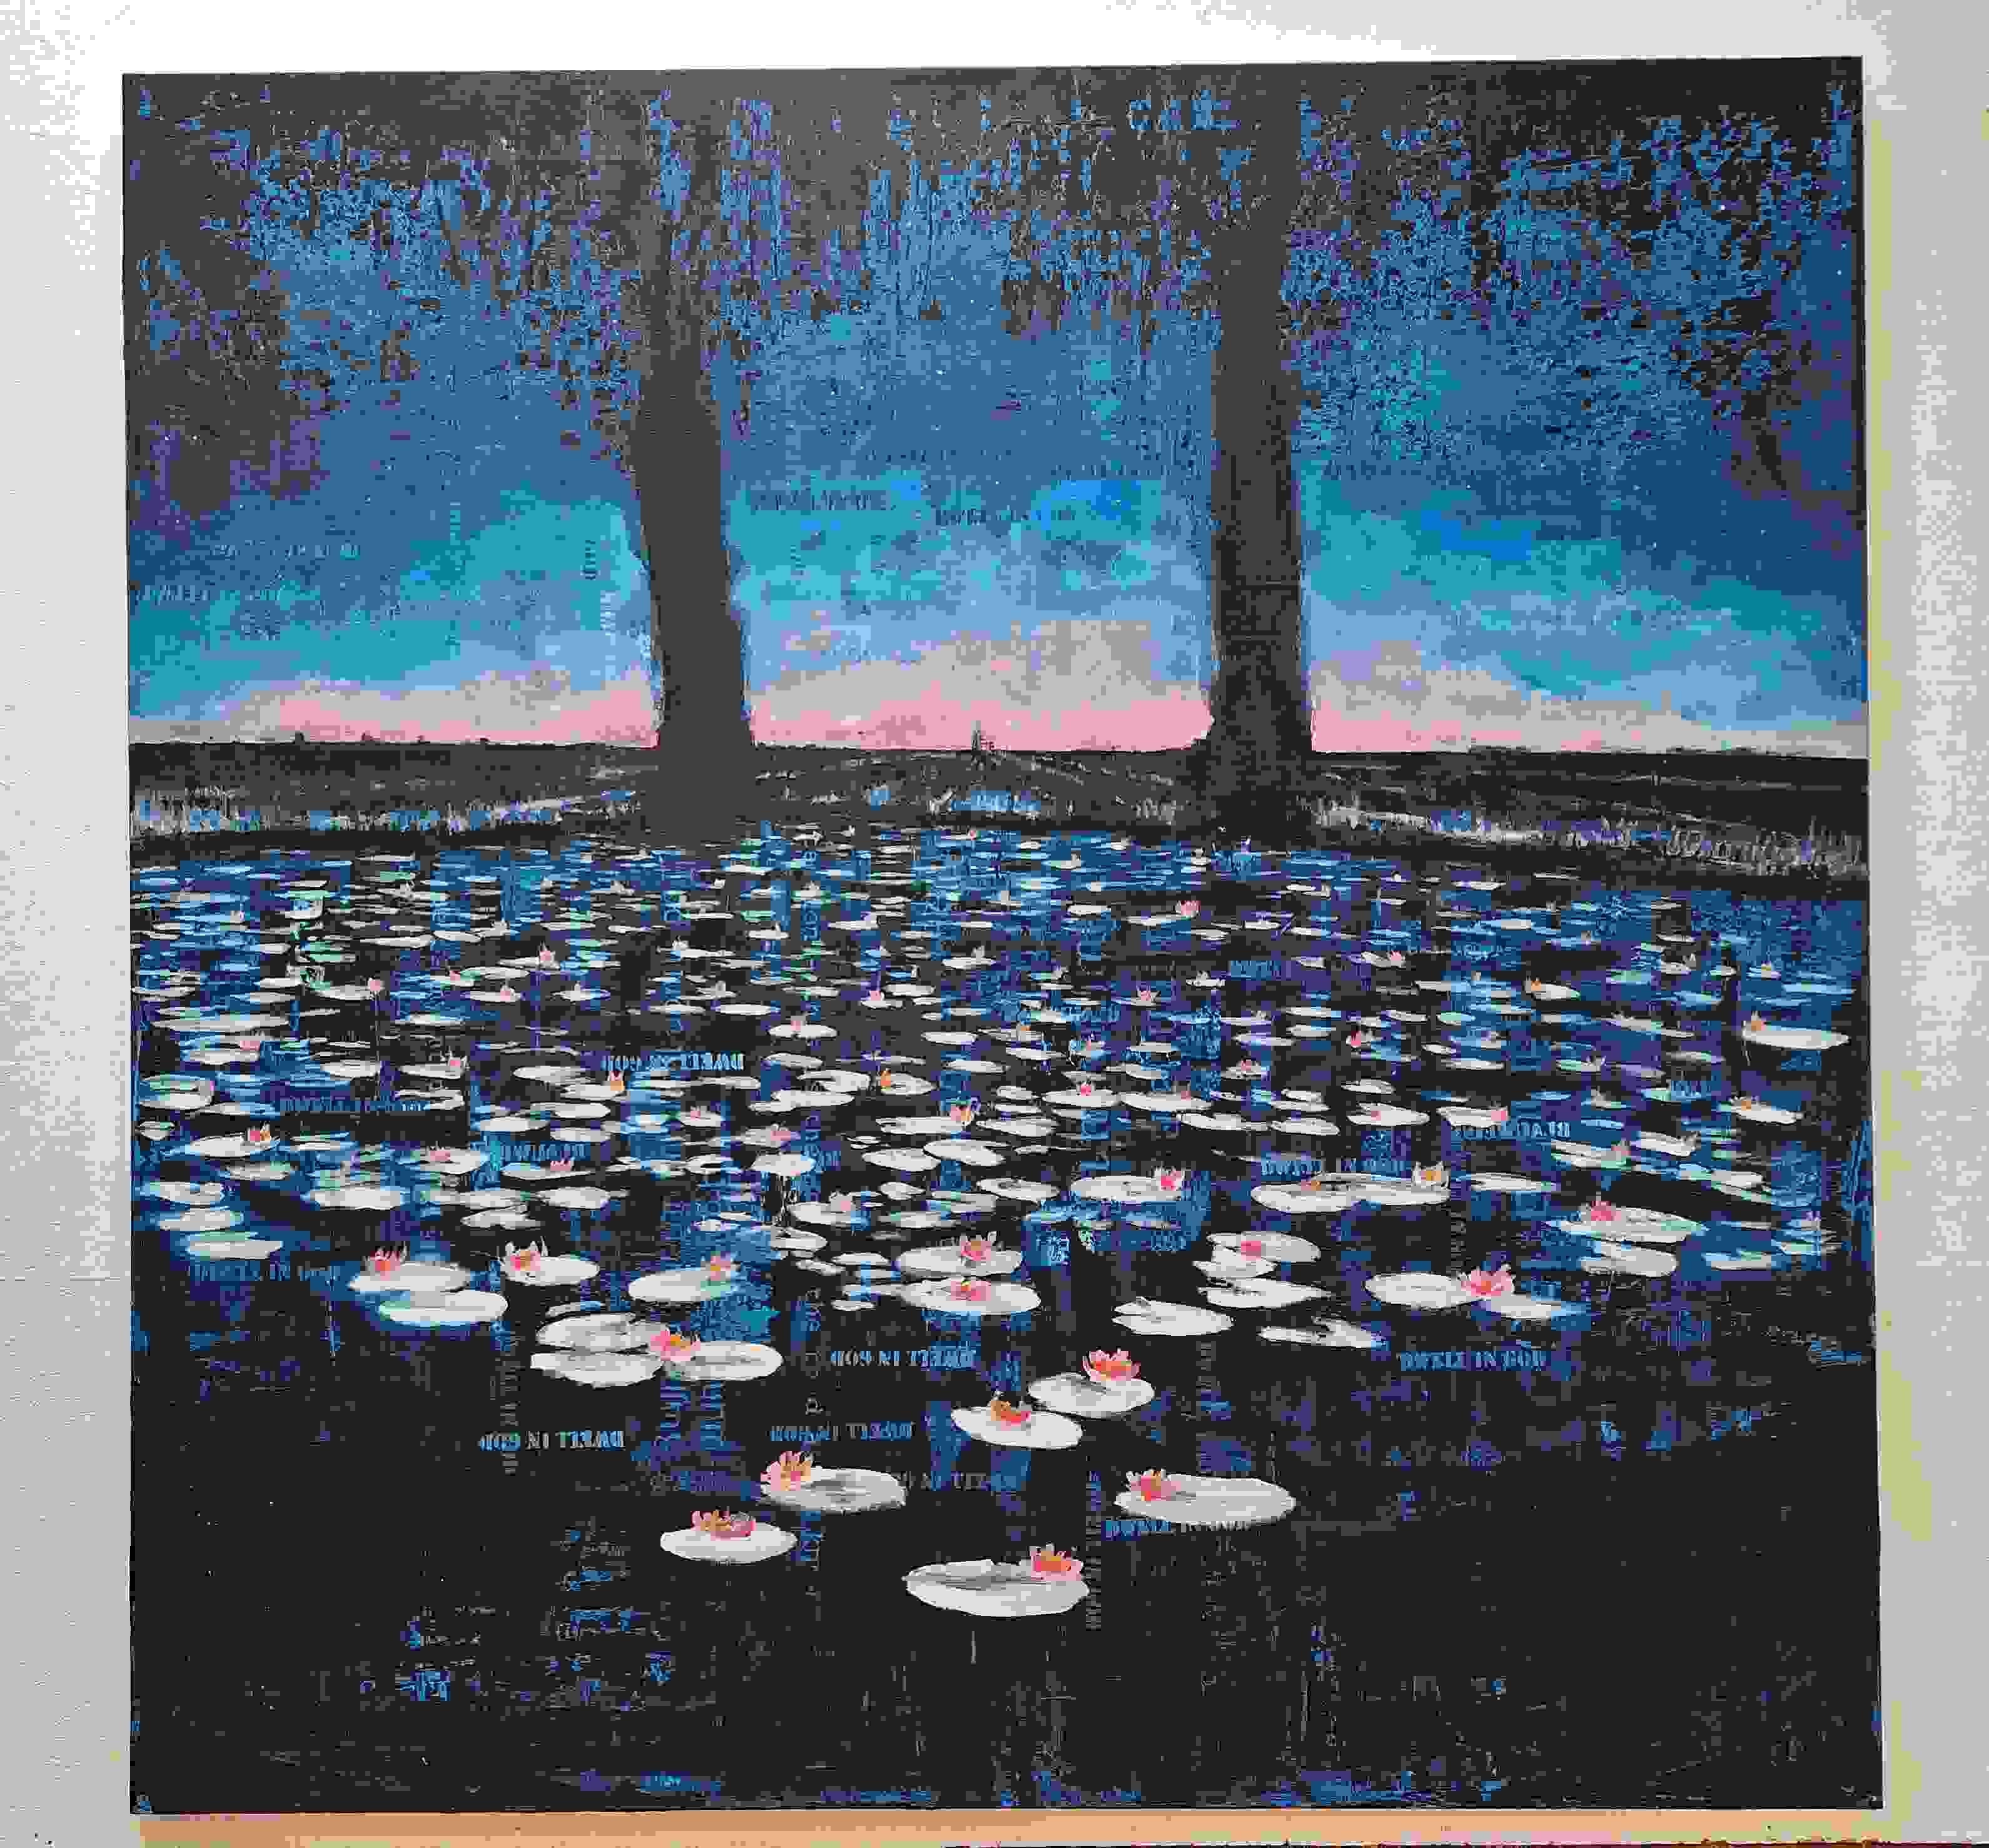 Waterlilies - contemporary water and flower scene, vibrant landscape painting  - Contemporary Painting by Michael Pröpper